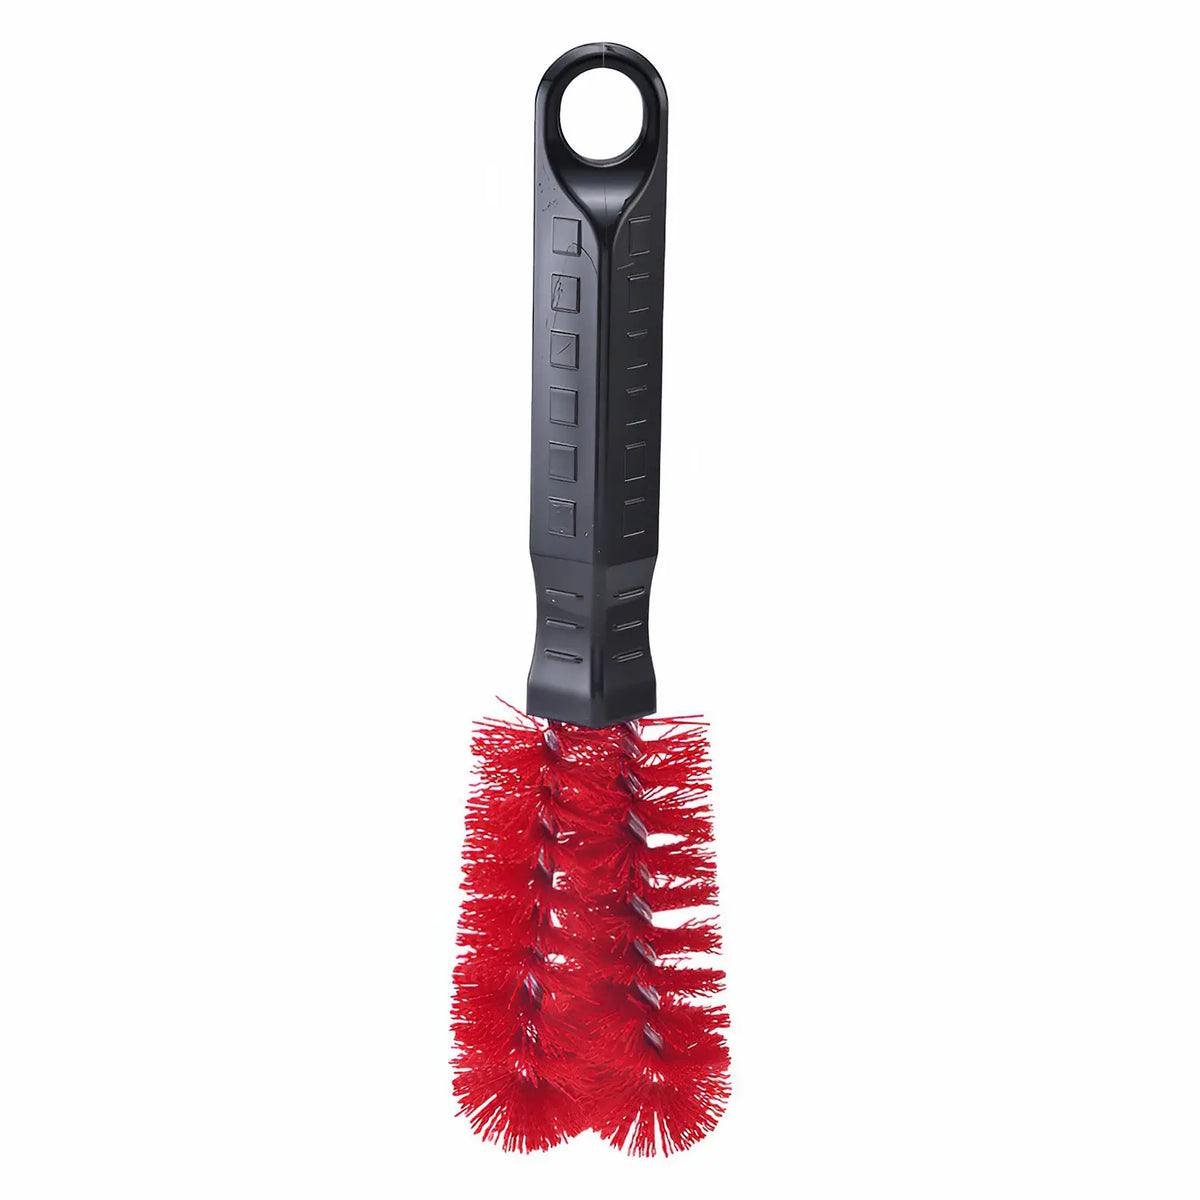 Three Snow PBT Resin Cleaning Brush for Tebo Noodle Strainer